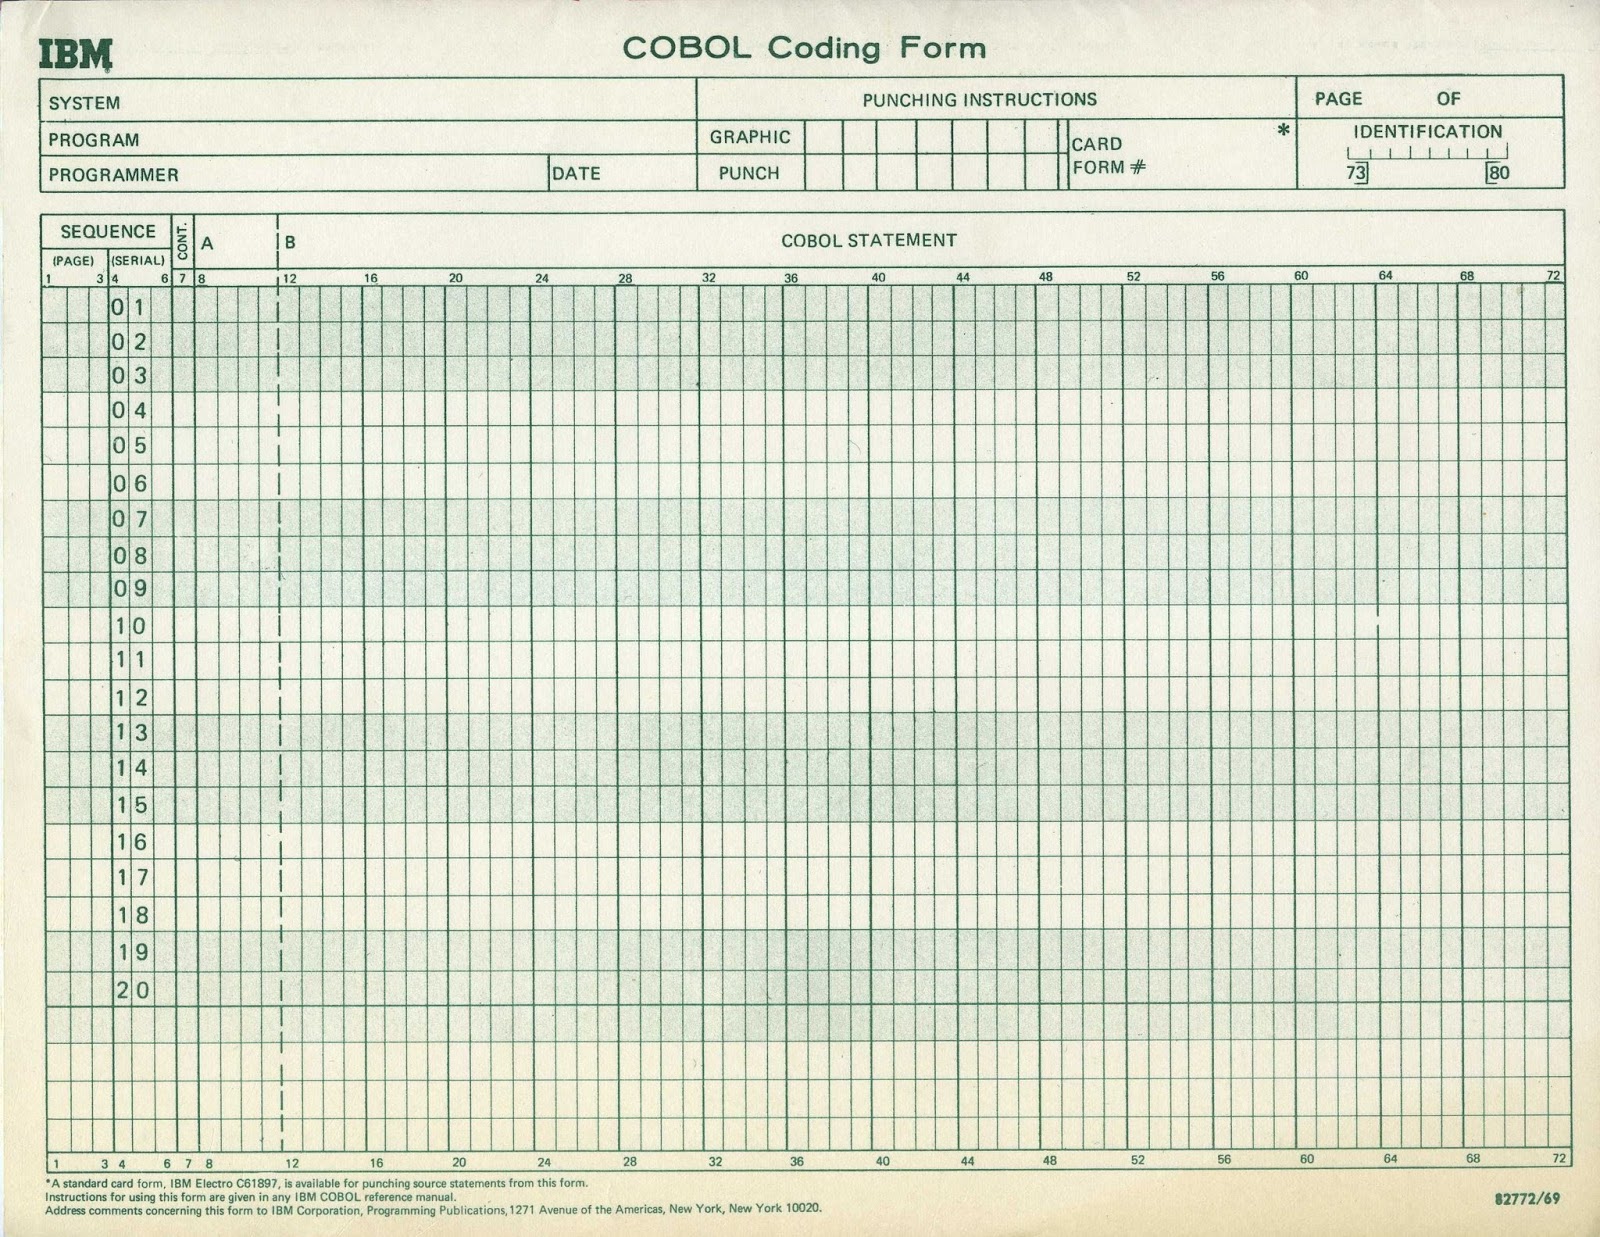 COBOL Punched Card